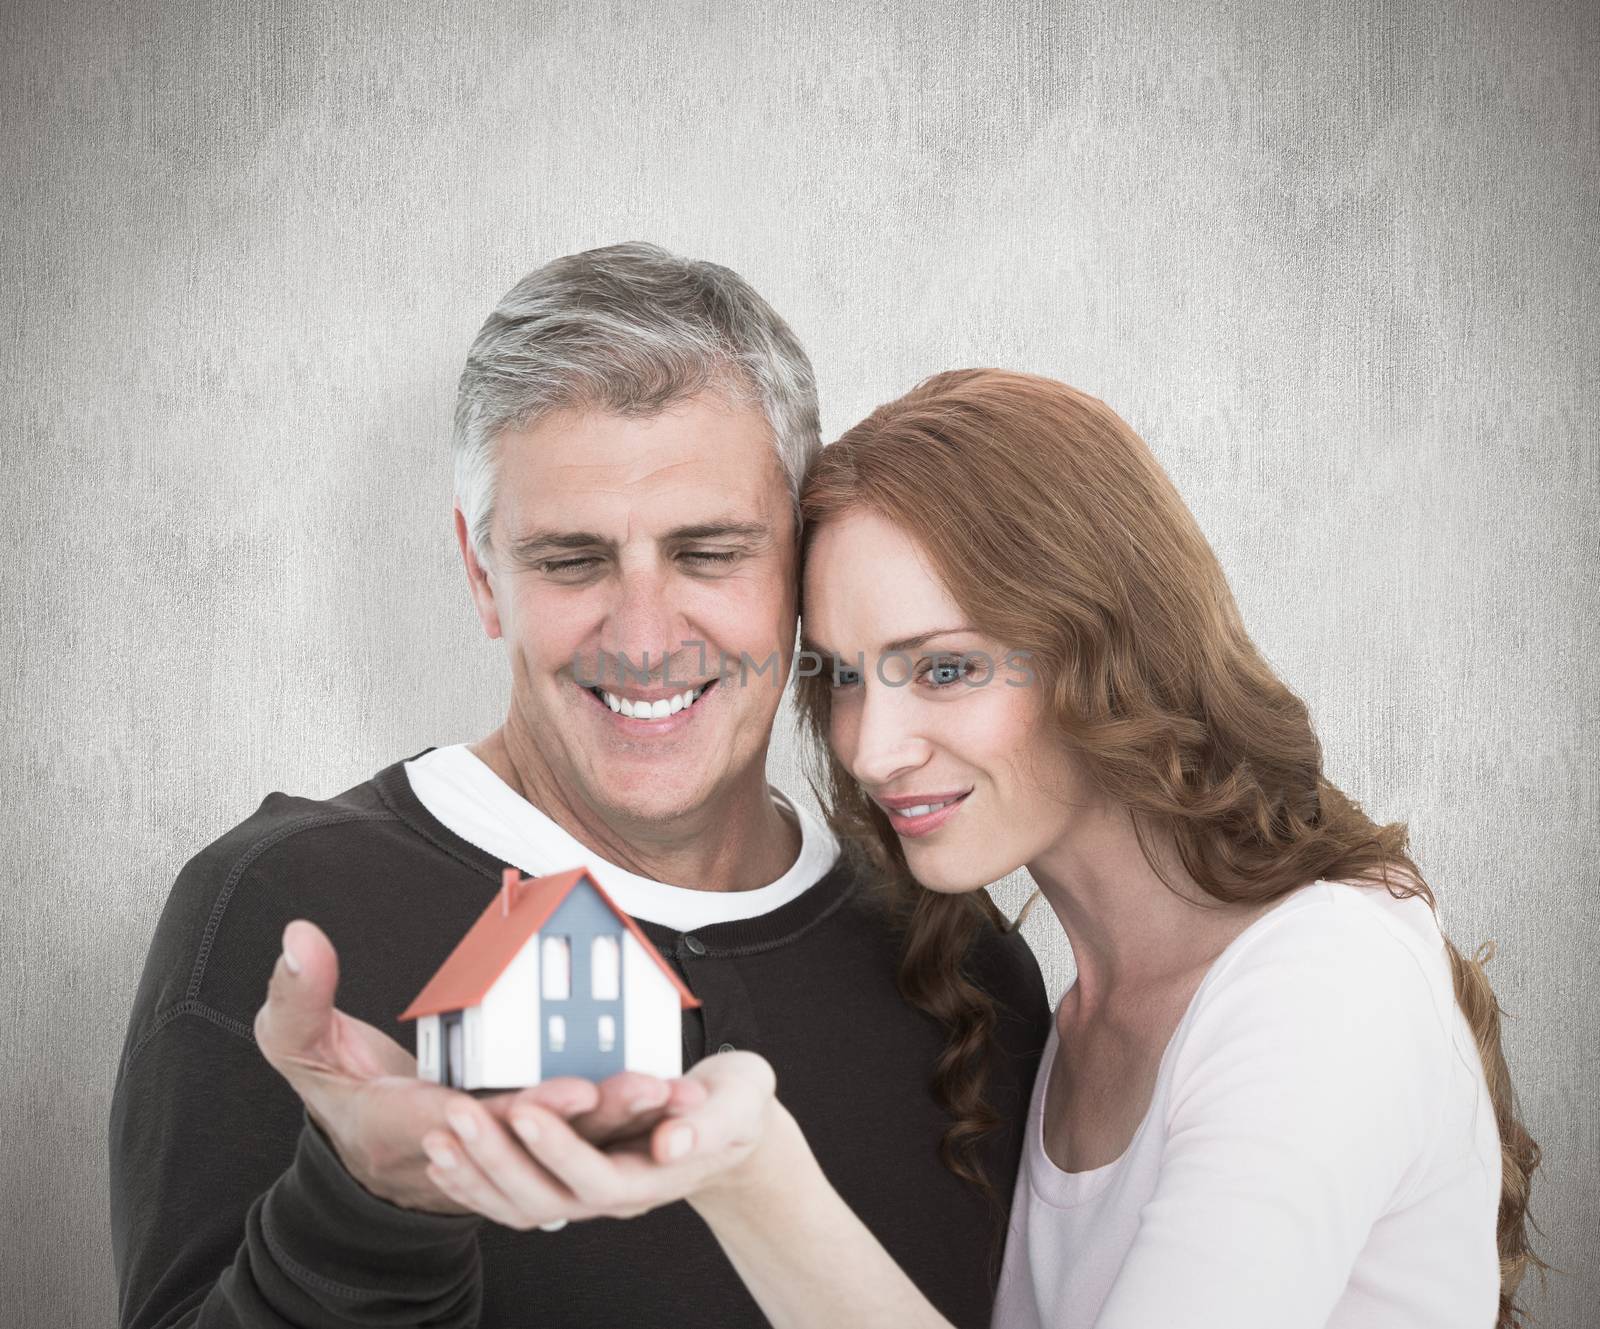 Casual couple holding small house against white background